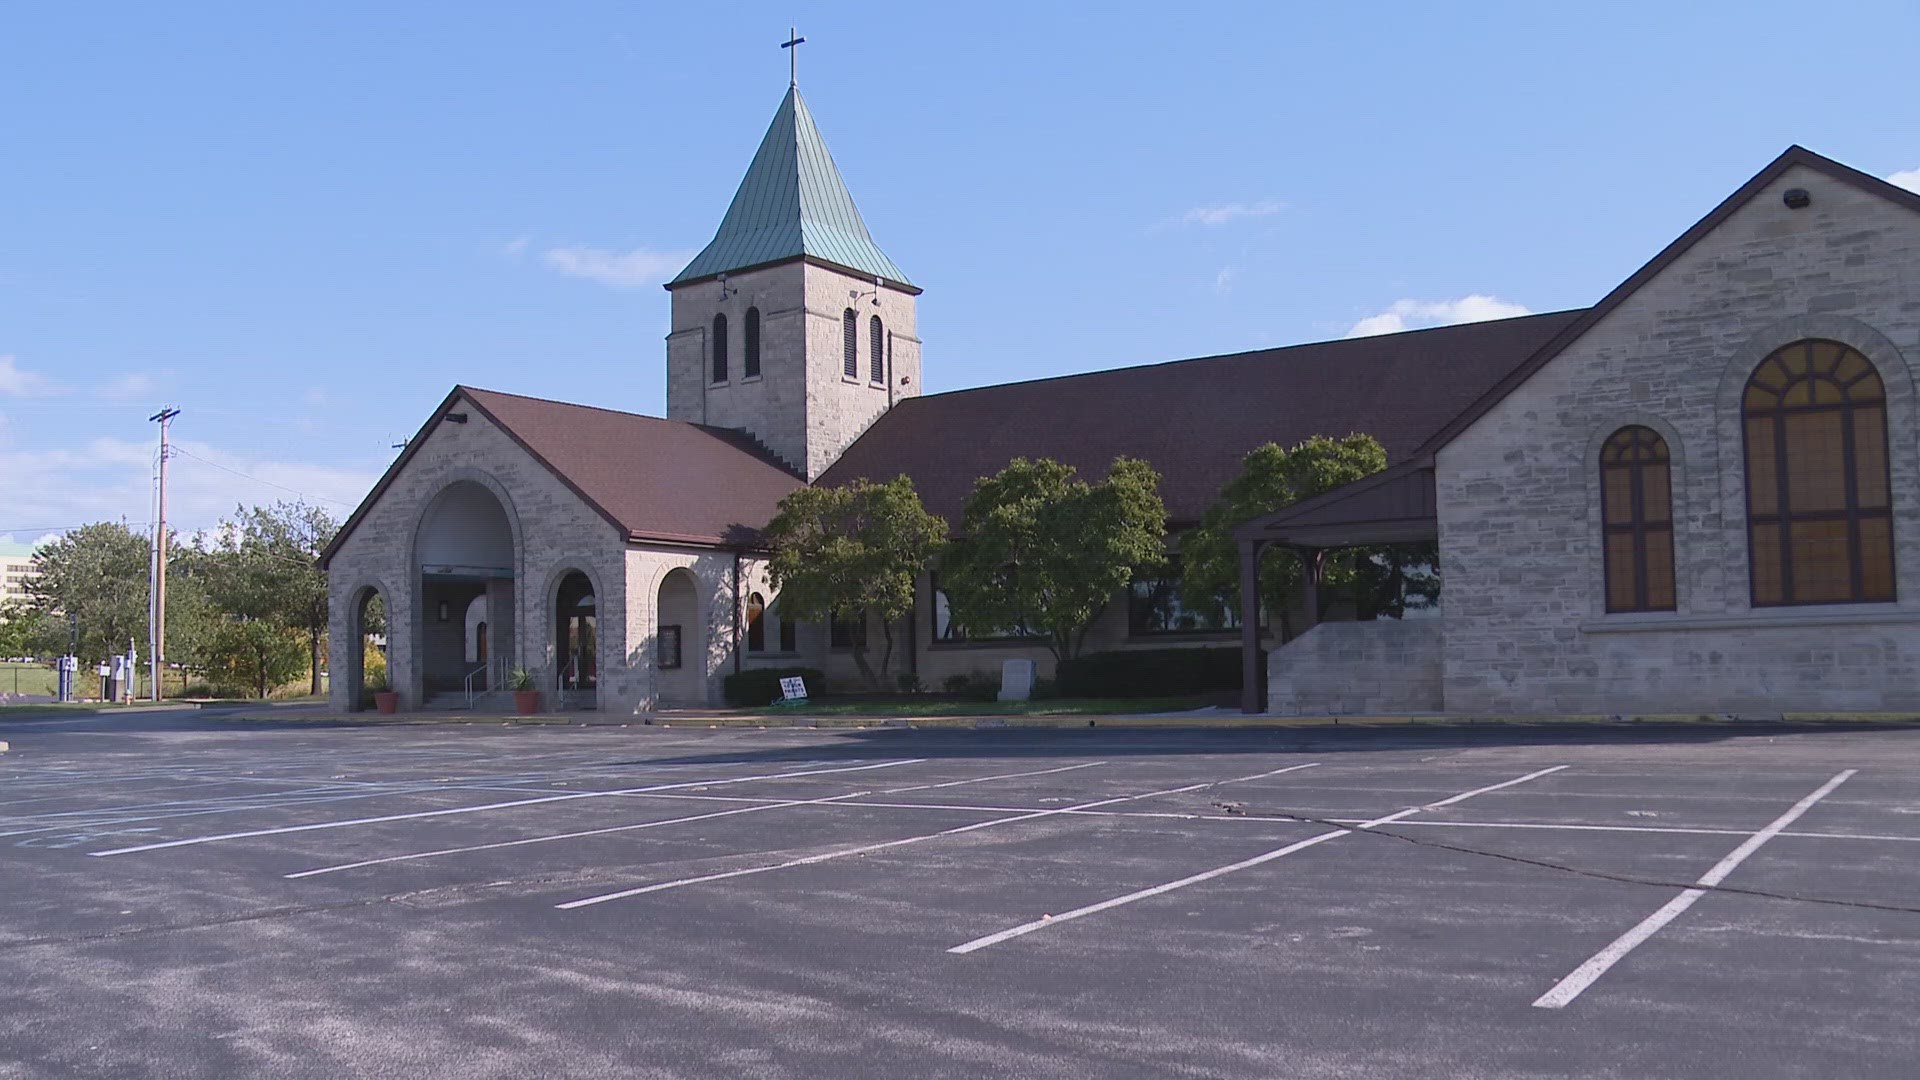 After more than 100 years, St. Monica Catholic School will close its doors. The school has faced ongoing challenges due to inconsistent and declining enrollment.